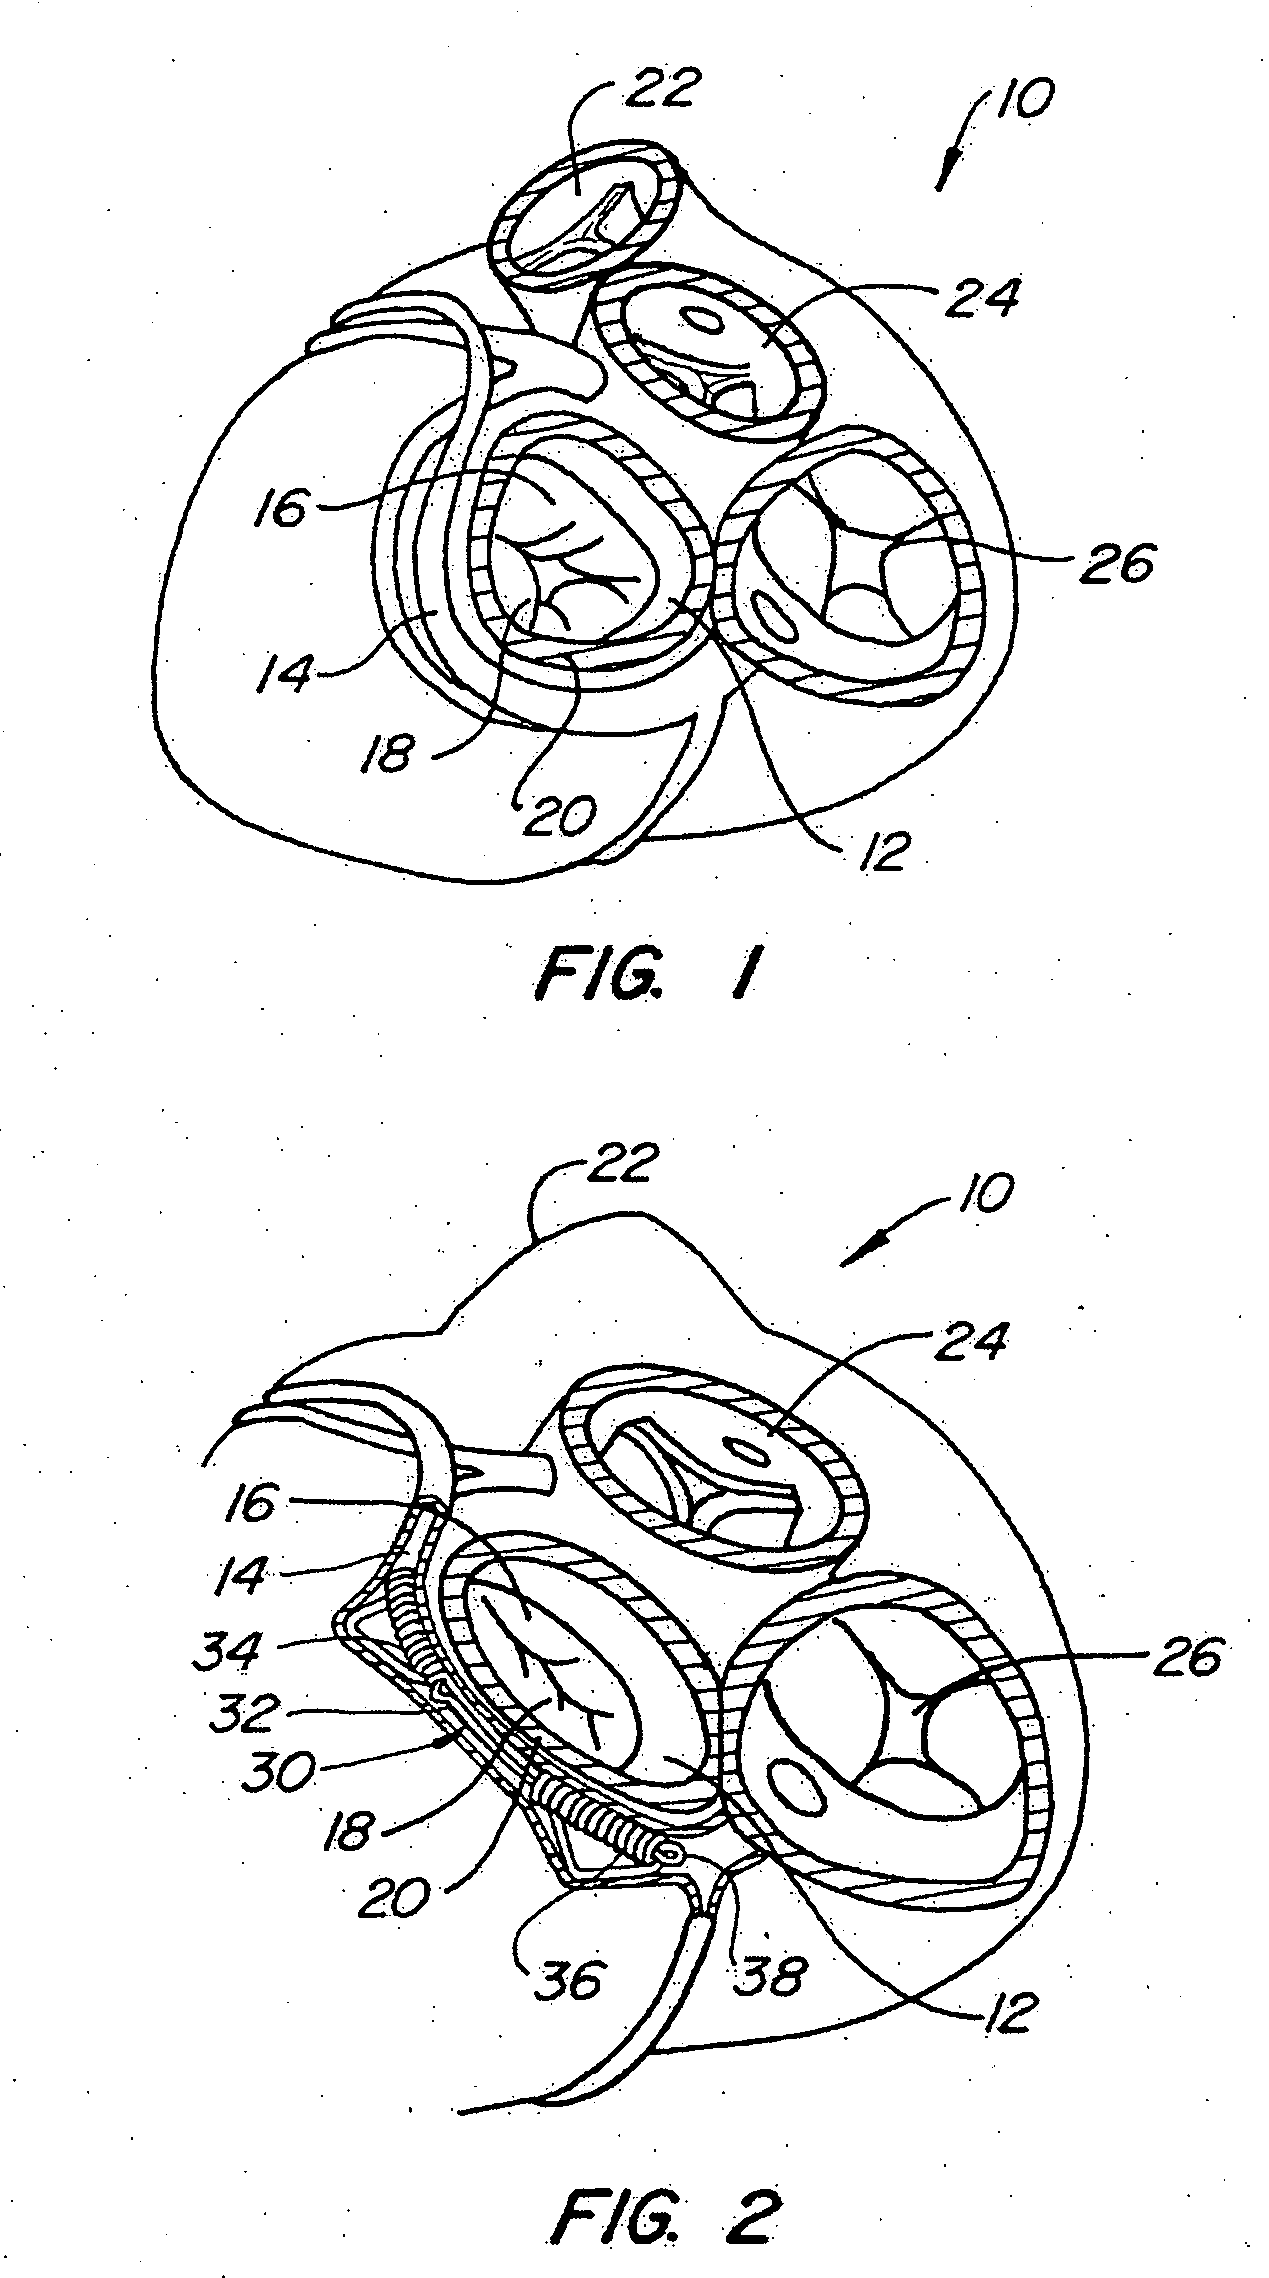 System and method to effect the mitral valve annulus of a heart